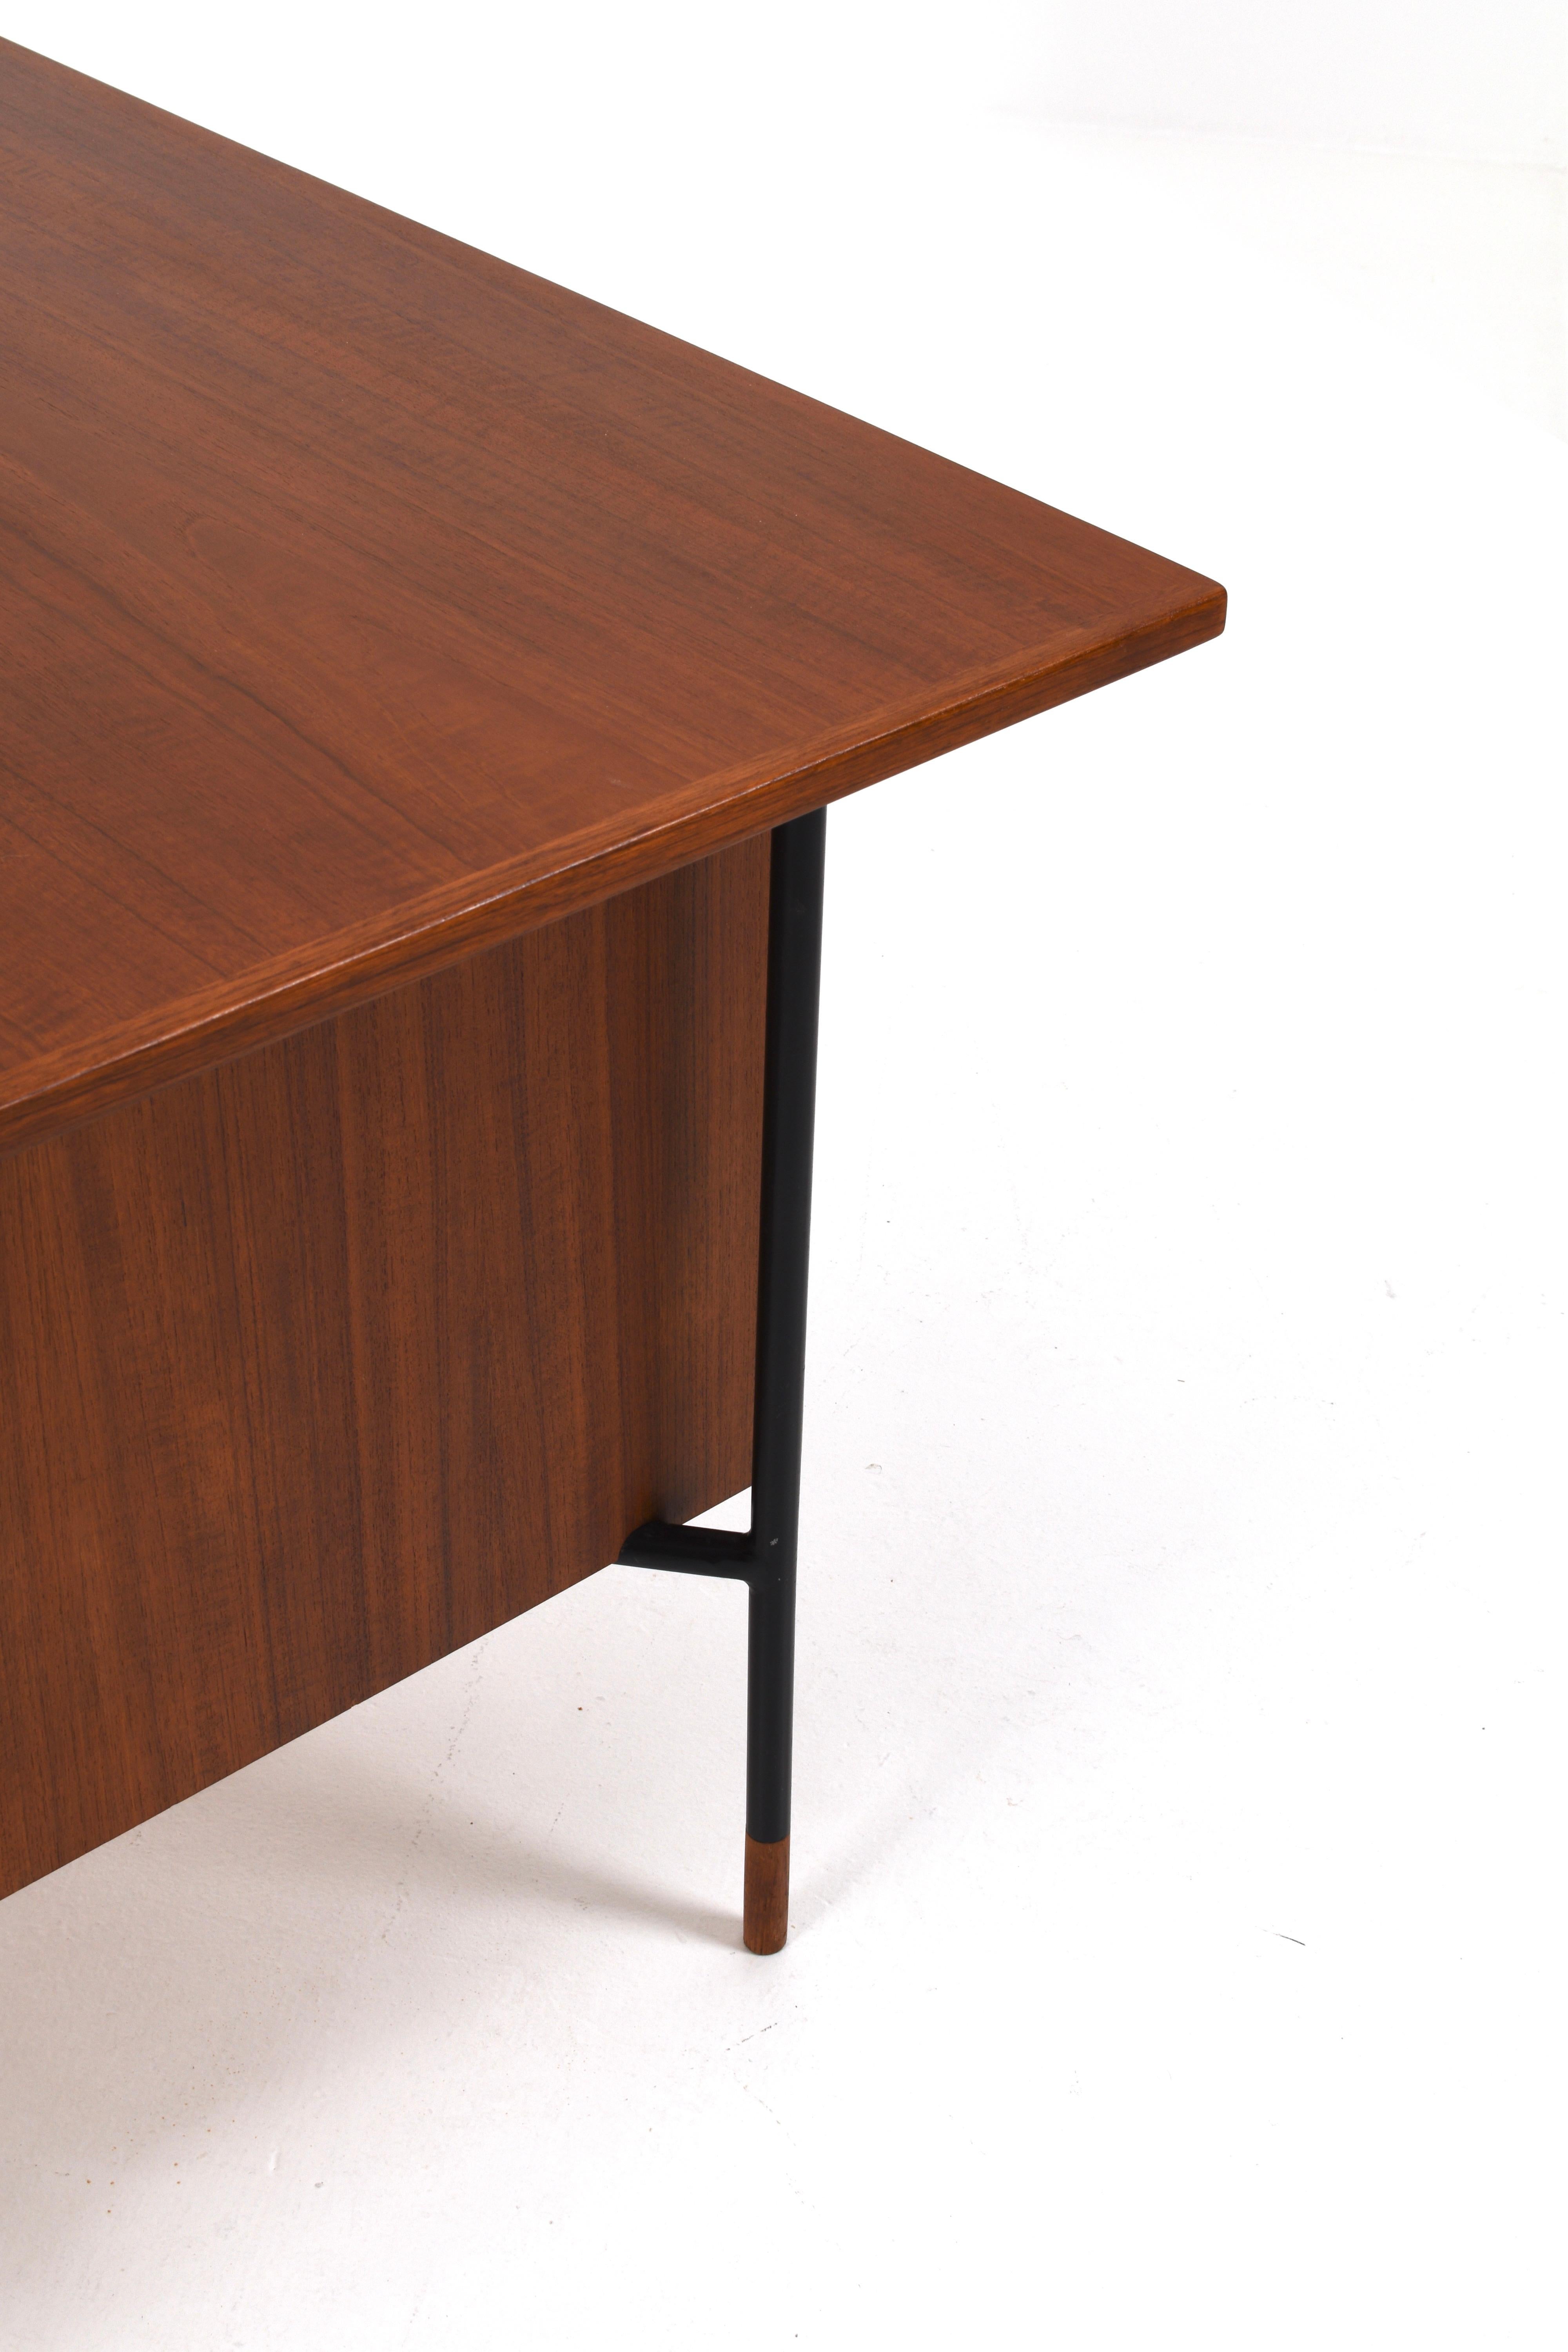 Rare Desk H-55 by Åke Hassbjer in teak and steel base, 1950s For Sale 2